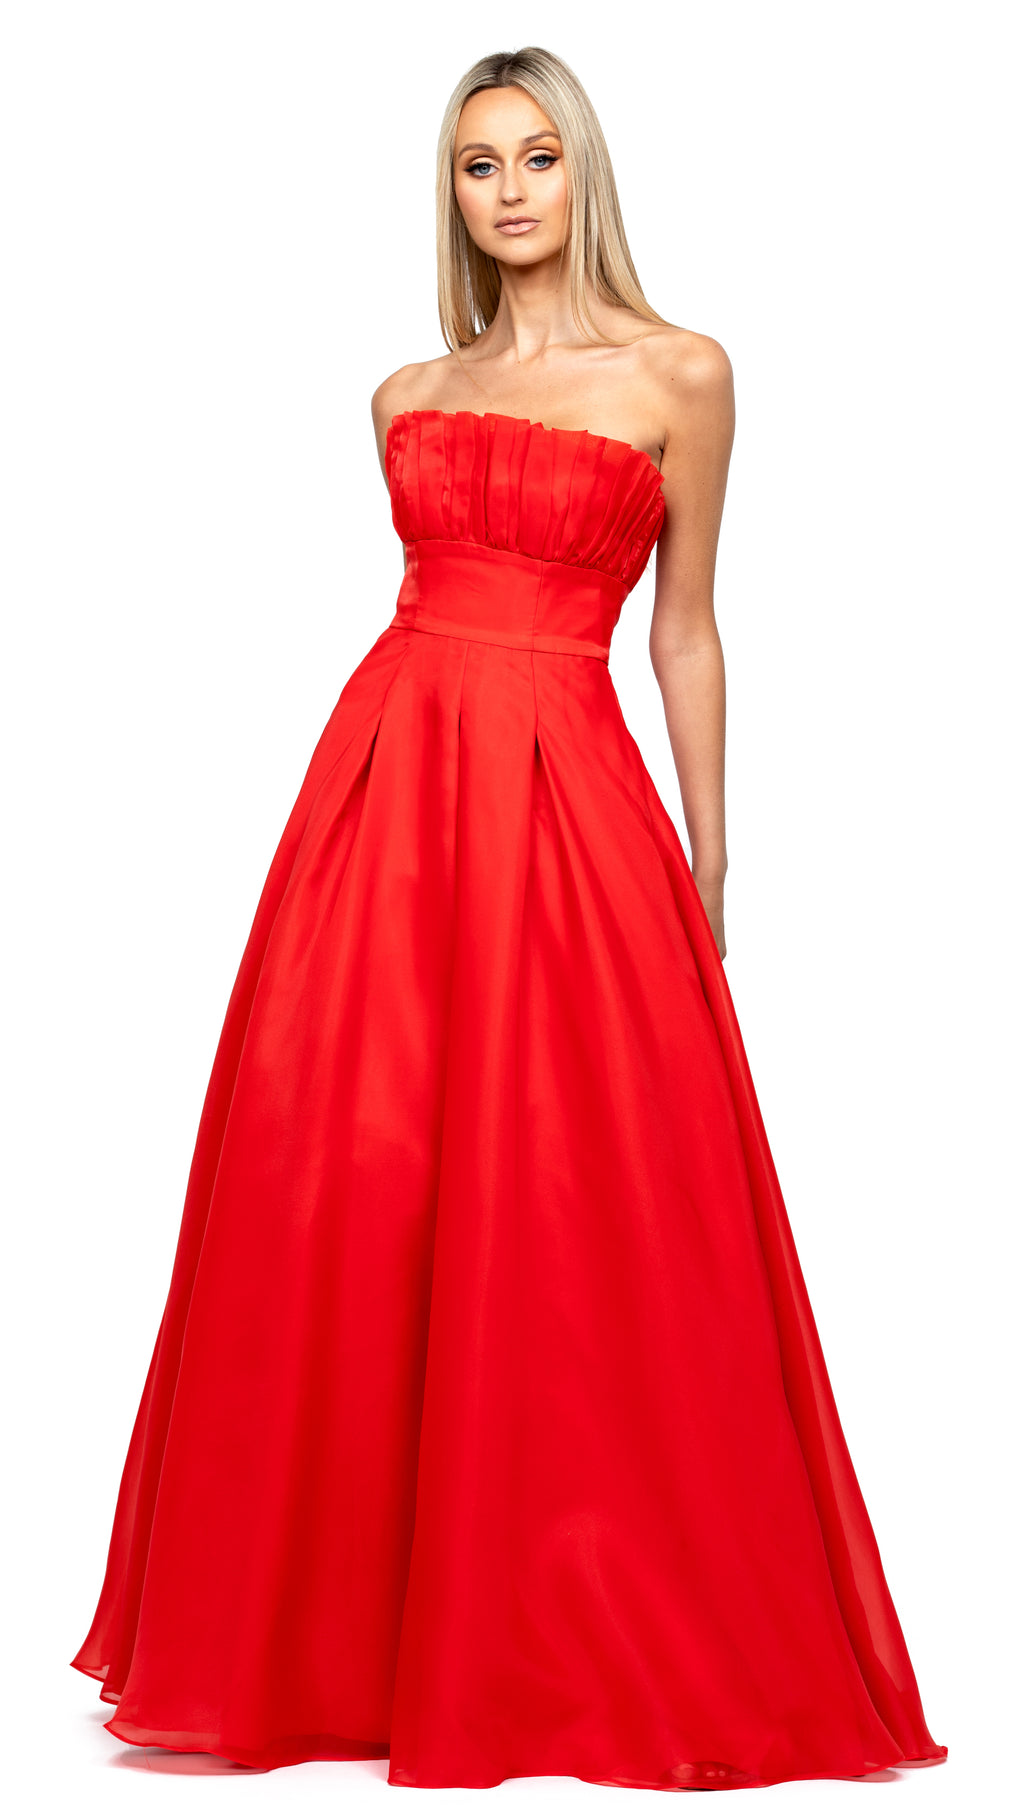 Itzi Ruffled Ball Gown in Light Red front